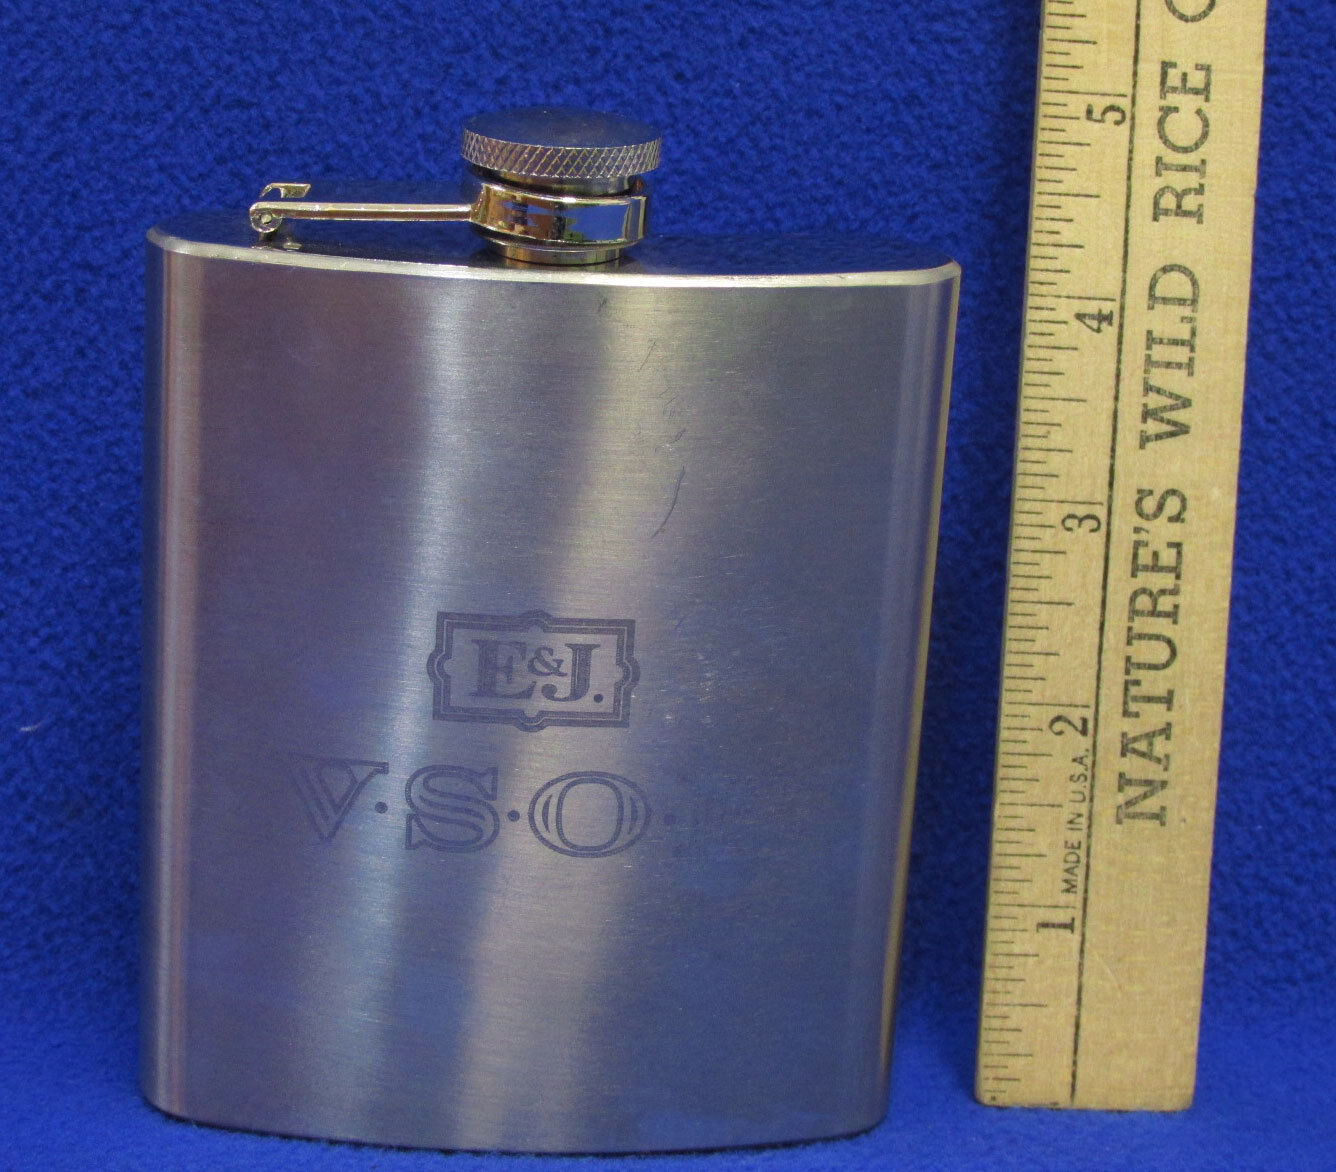 Stainless Steel Metal Flask E&J V S O P Brandy Etched 7 OZ Screw Top Lid